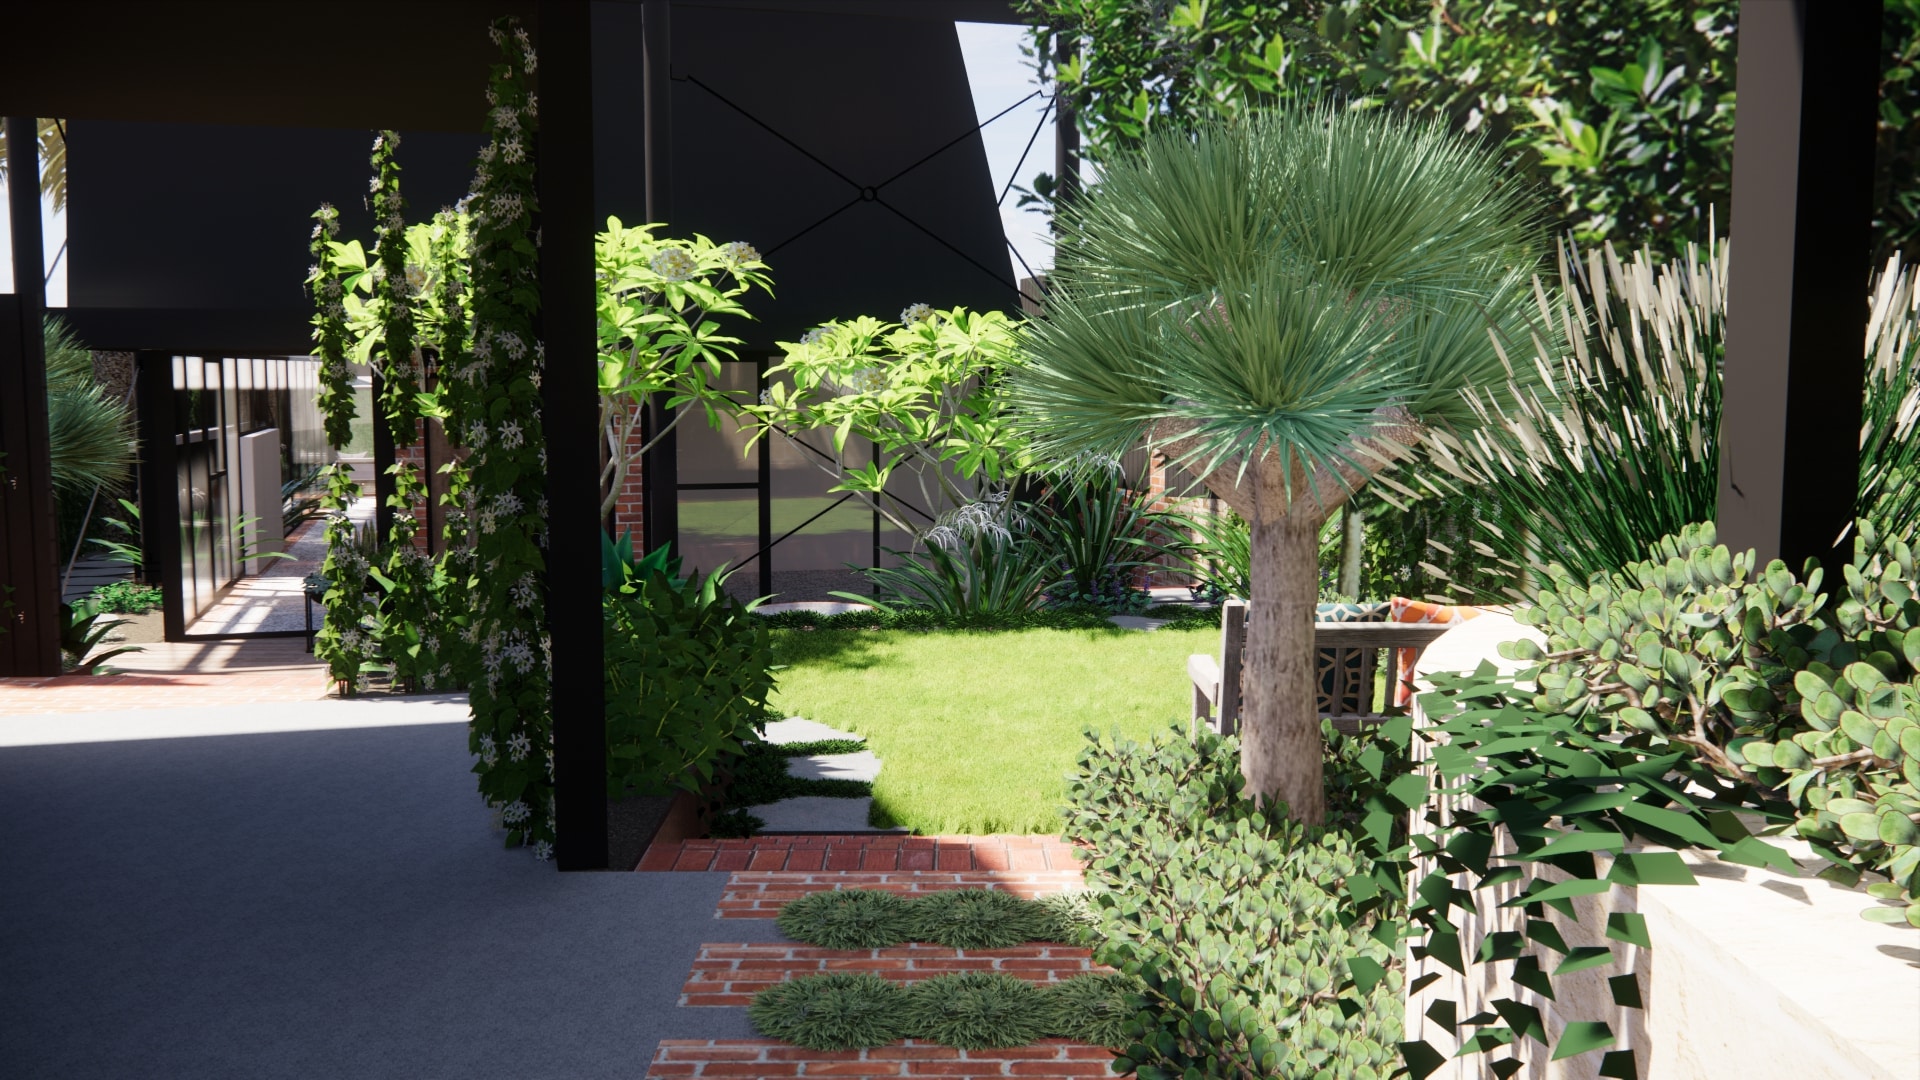 A landscape design render showing a new front entry and carport